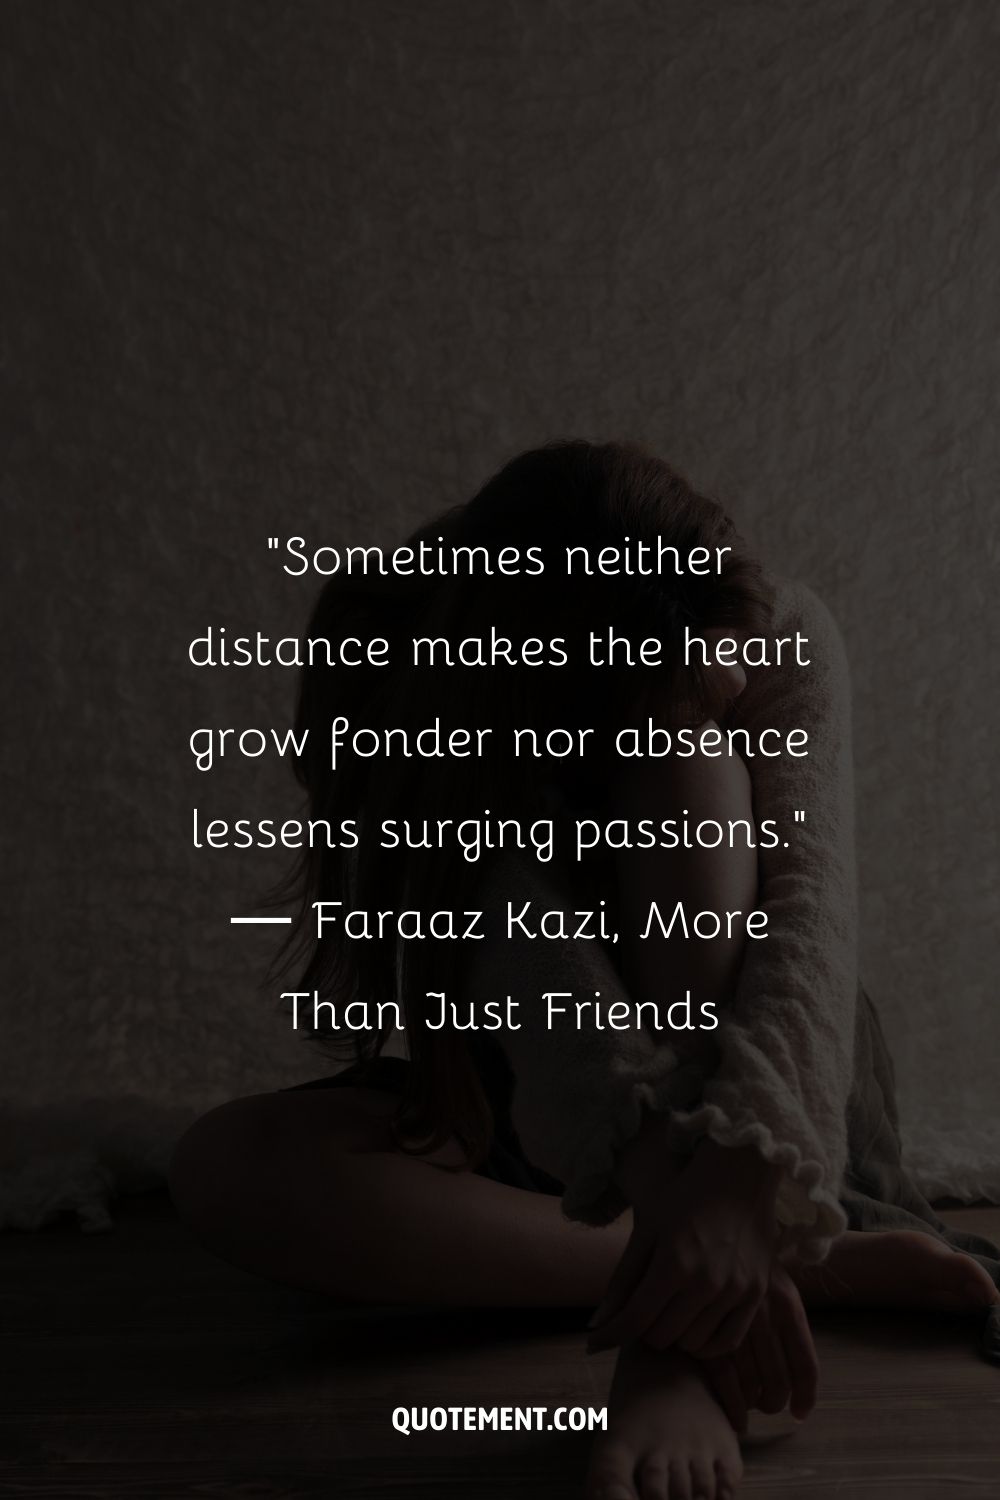 Sometimes neither distance makes the heart grow fonder nor absence lessens surging passions